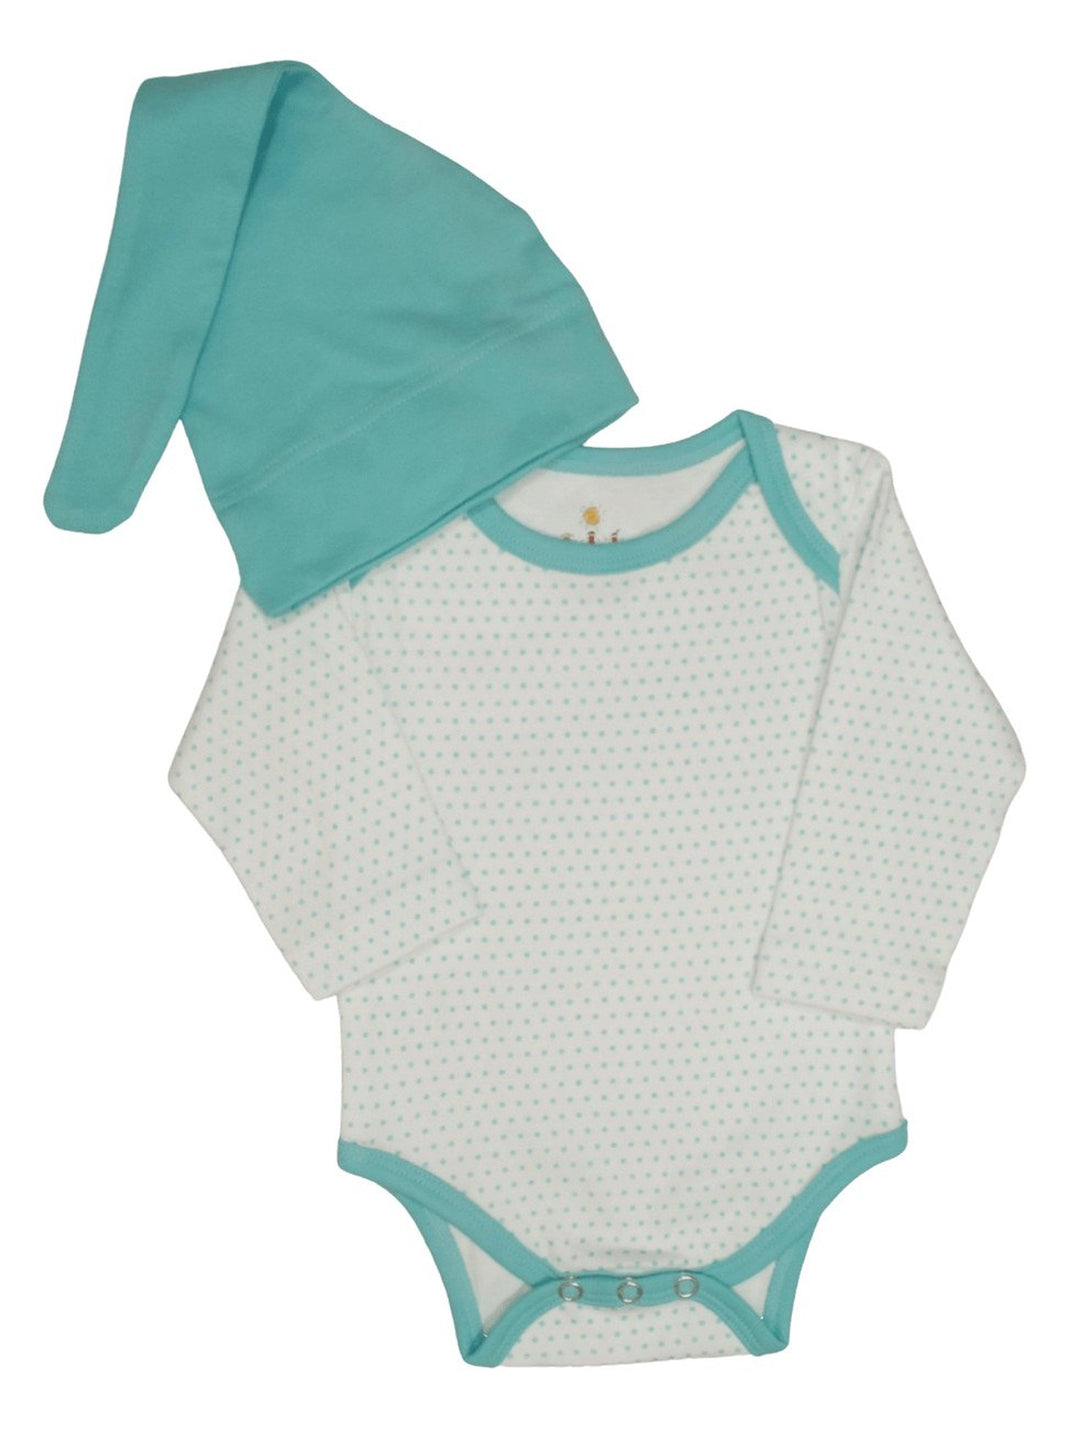 NewbornSnap Long Sleeve Body Suit & Hat - Available in 4 ColorsPassion Lilie